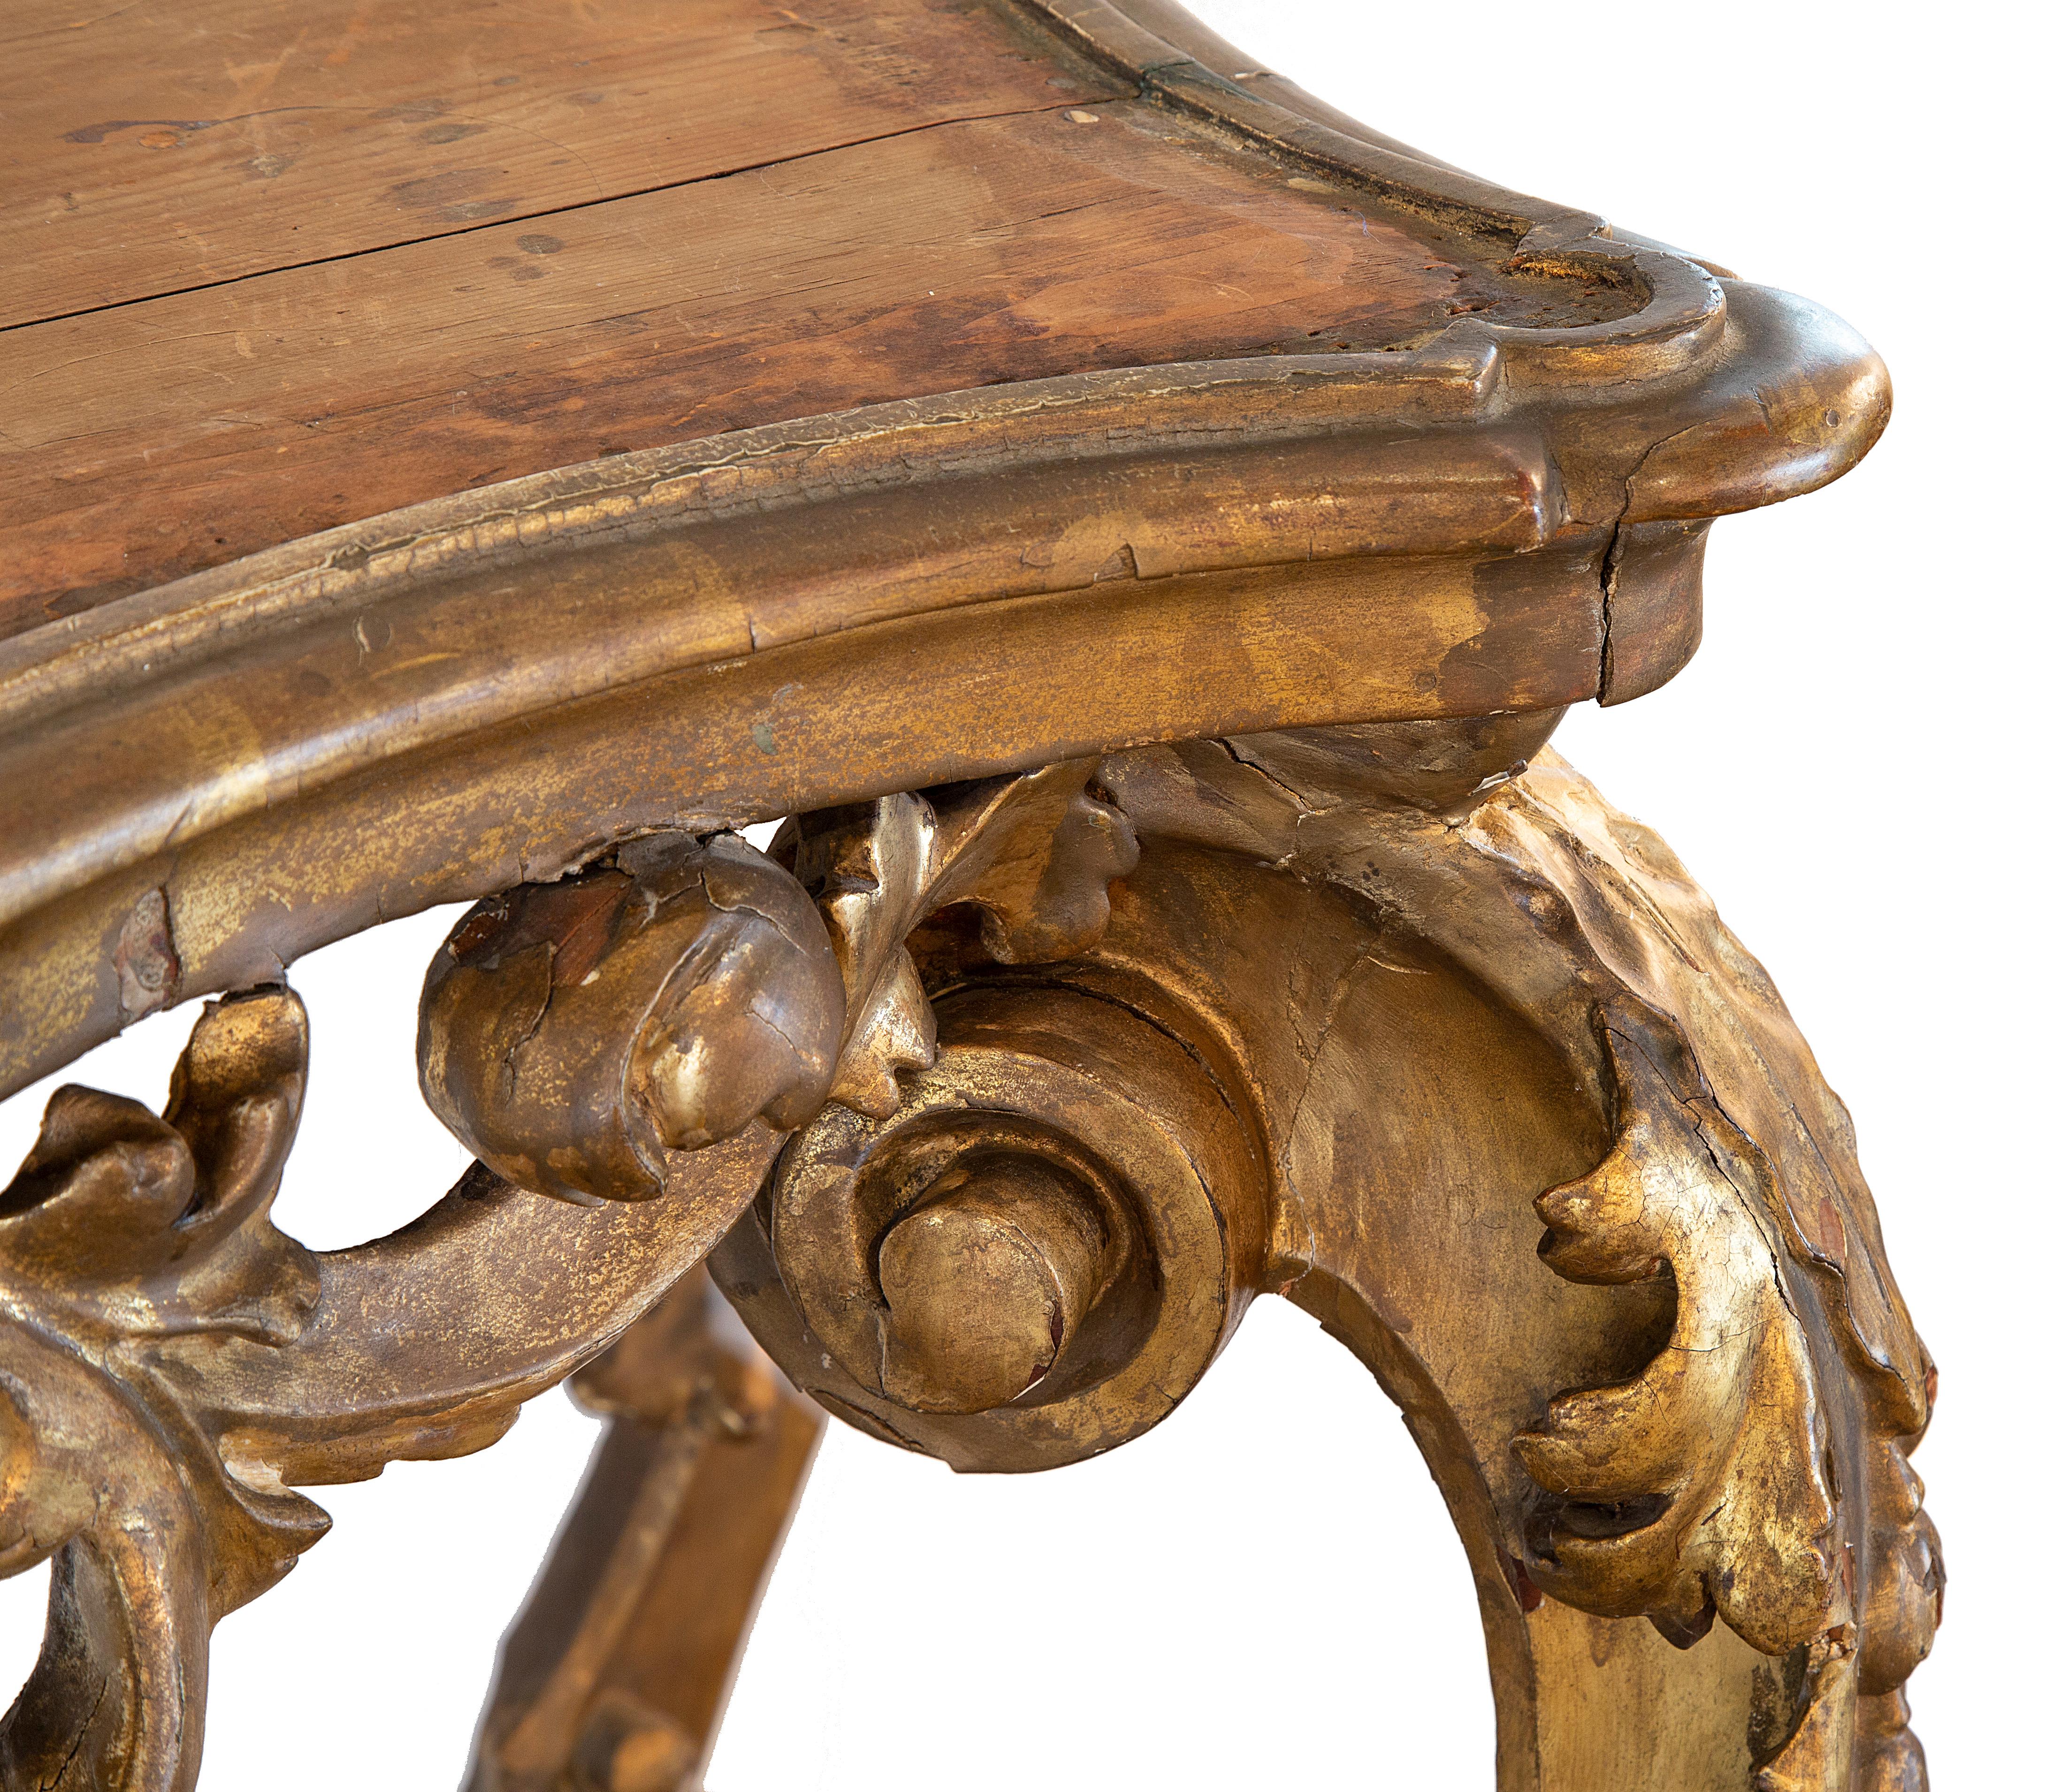 18th century Italian giltwood console; finely carved with original surface. Console top was likely leather or canvas originally.